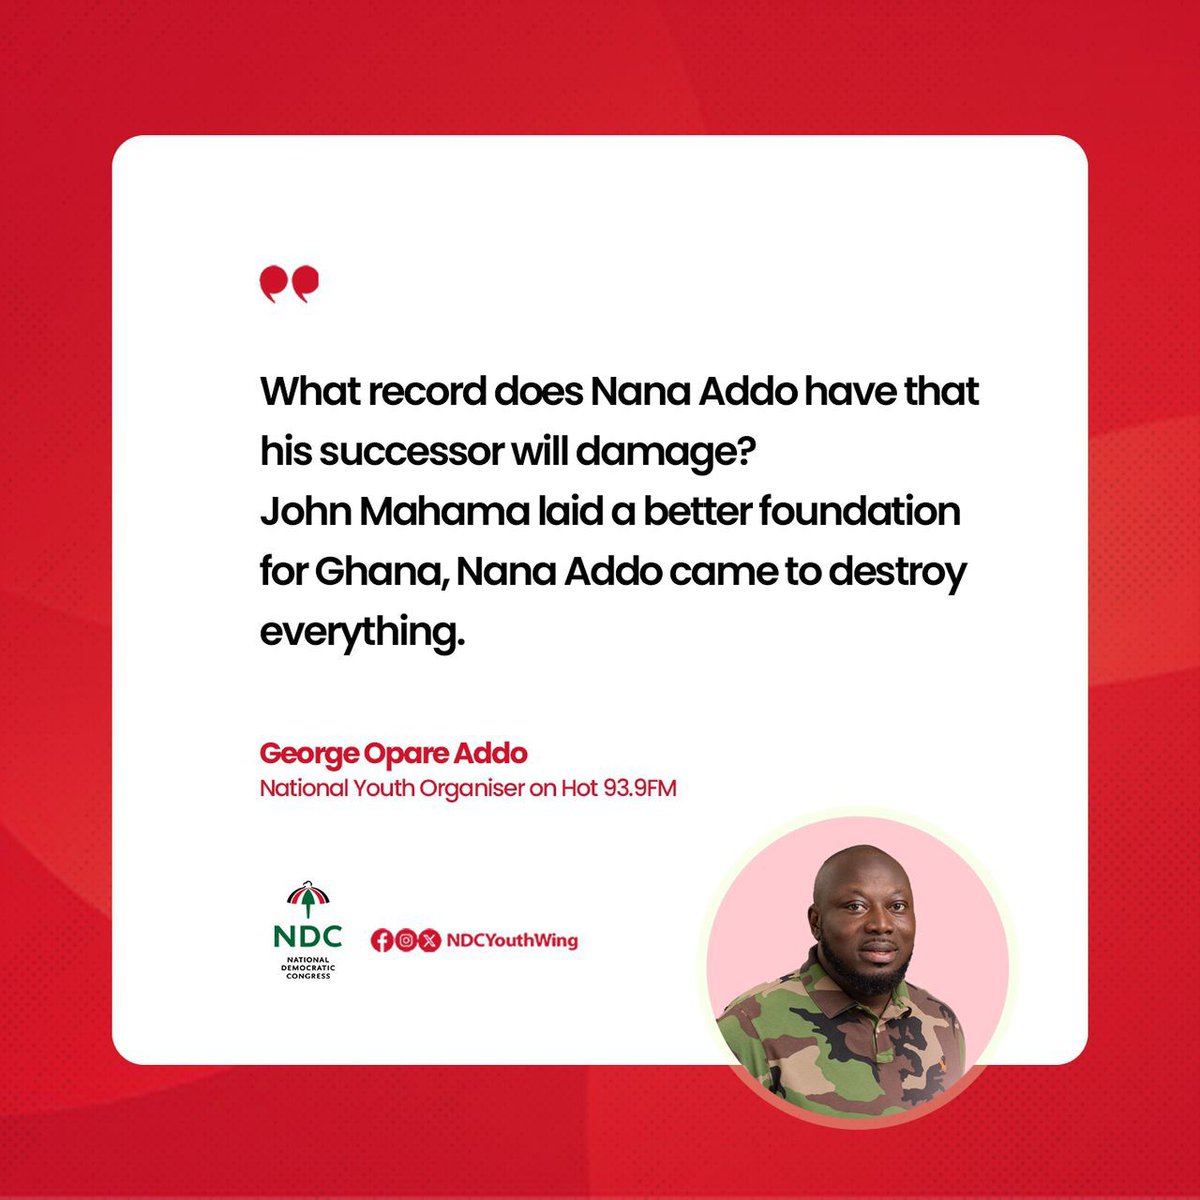 Pablo responds to Akuffo Addo's 'legacy' comment: 'John Mahama laid a better foundation, only for Akuffo Addo and Bawumia to destroy everything.' 
#TheGhanaWeWant #ChangeIsComing #YouthPower